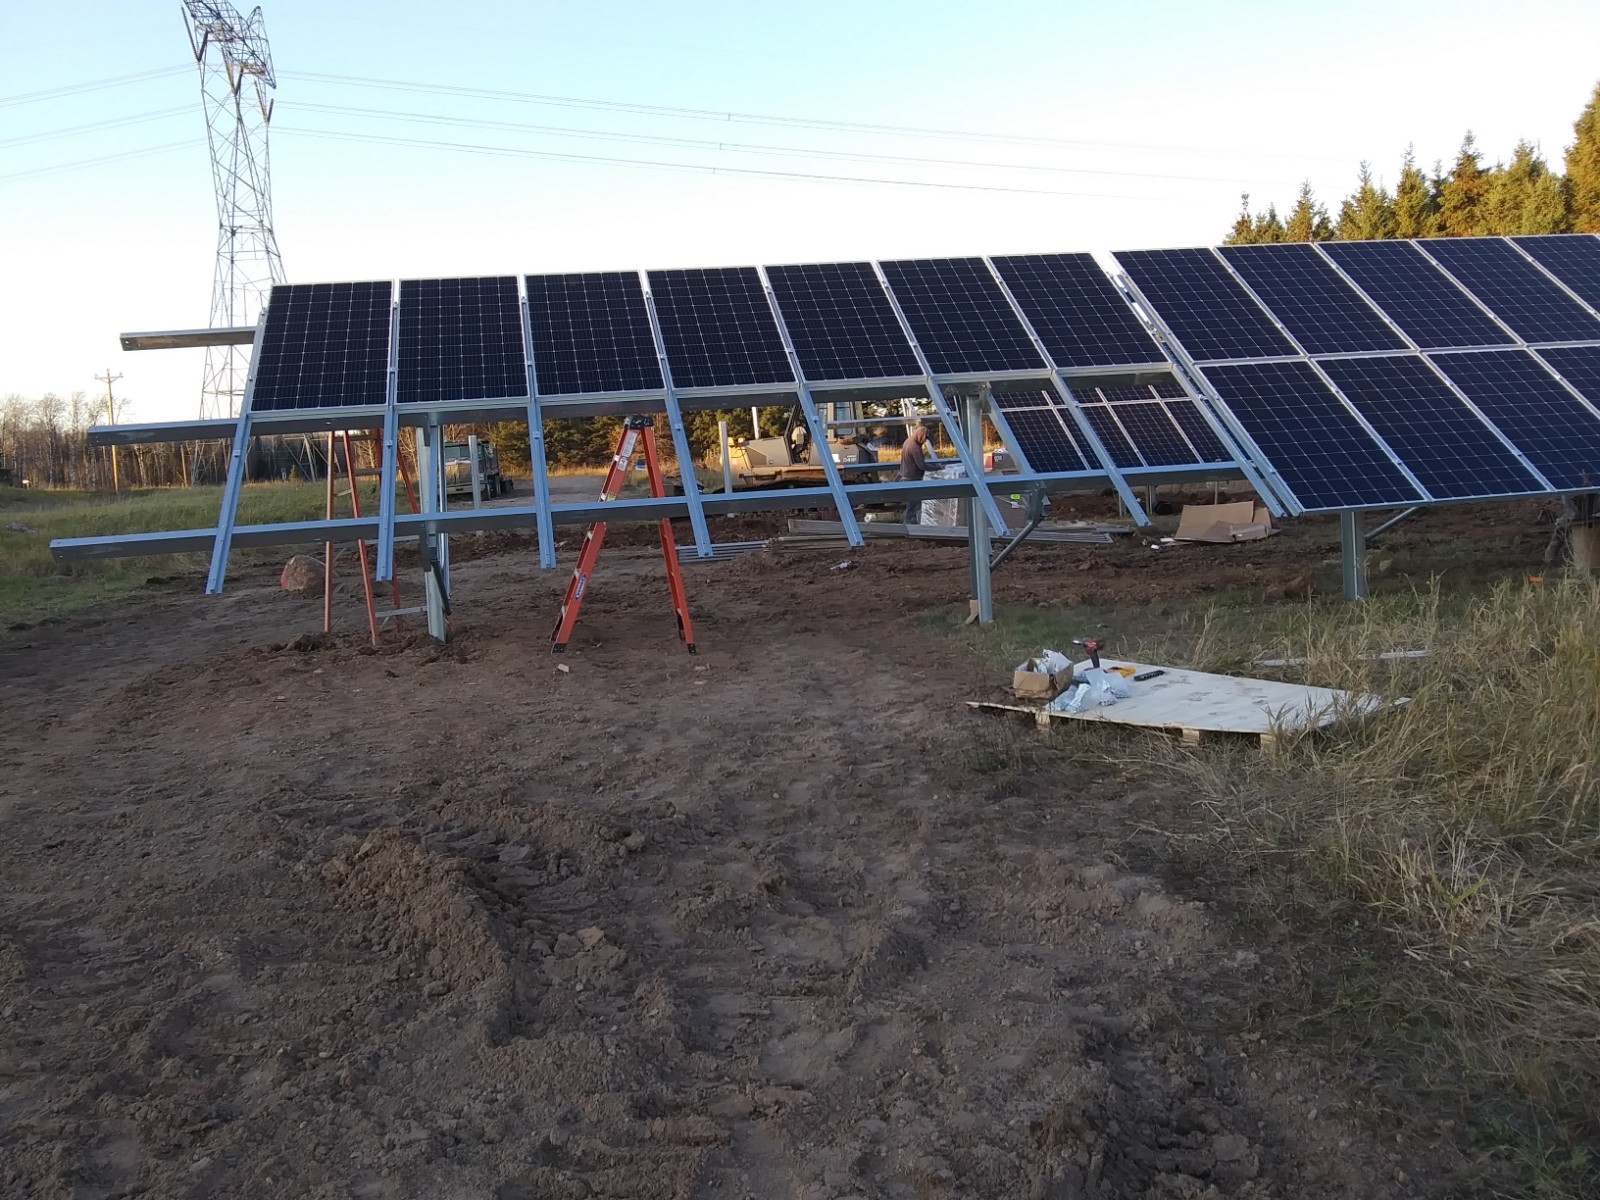 A solar panel in the process of being constructed